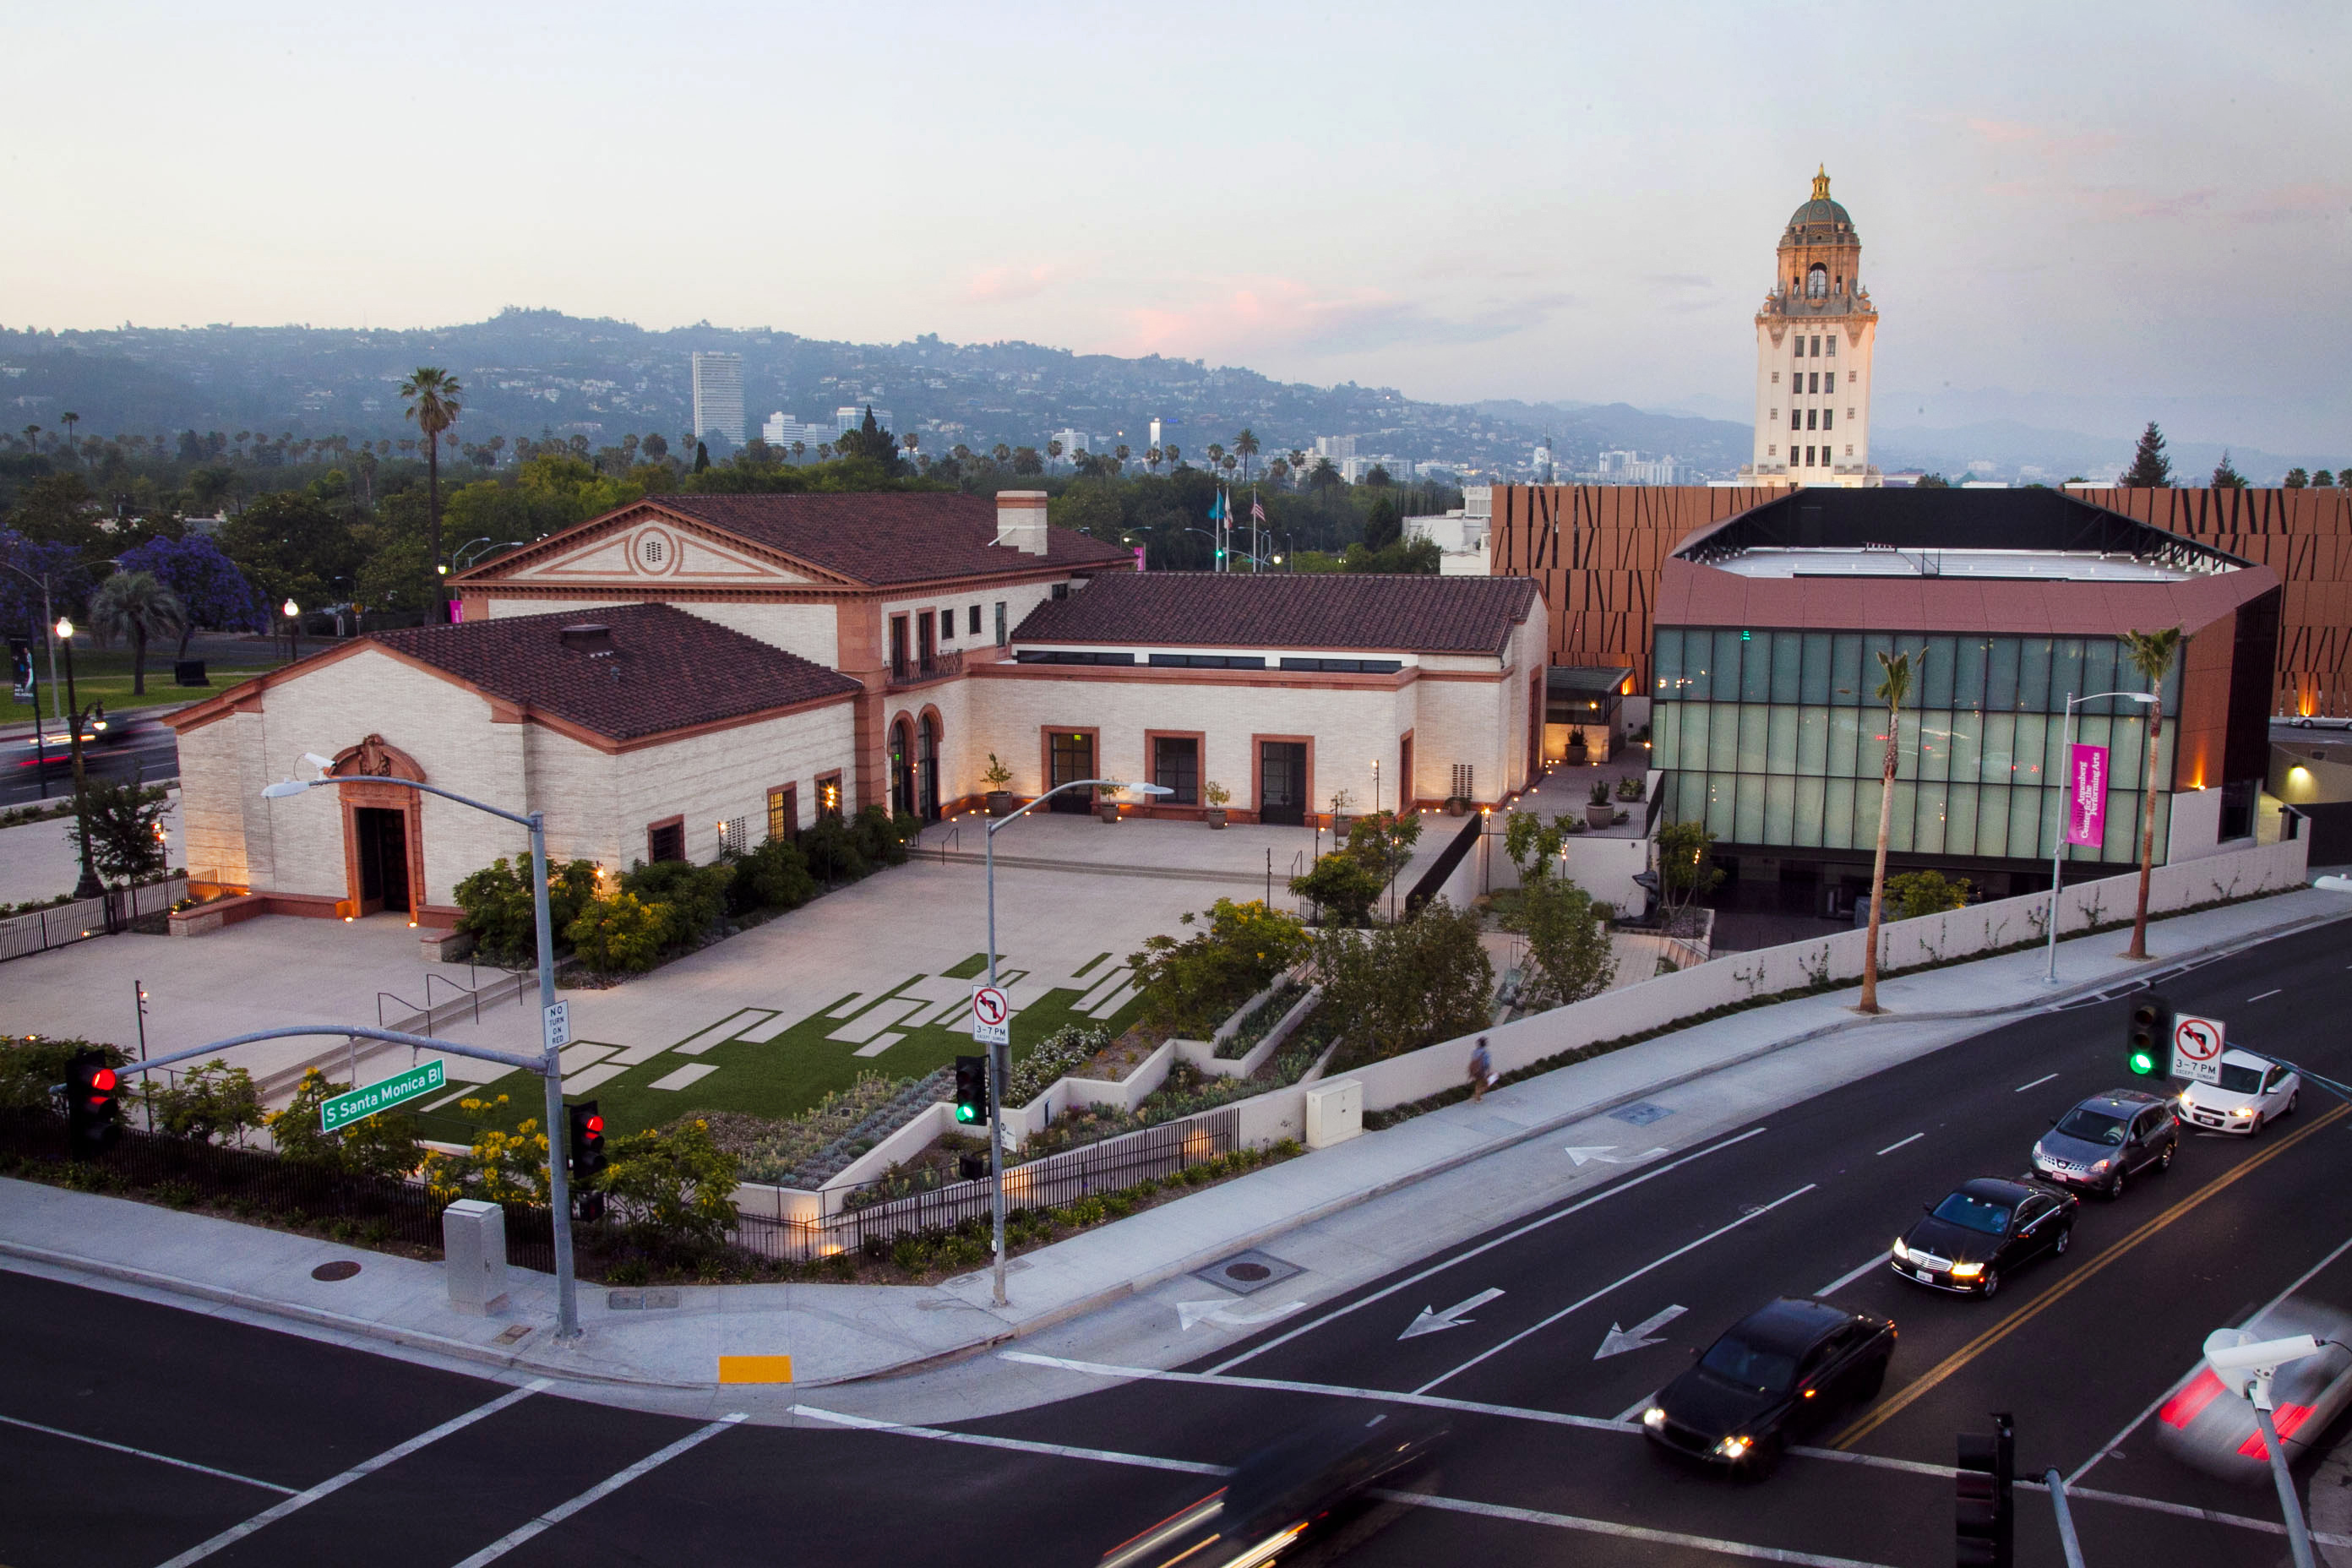 Wallis Annenberg Center for the Performing Arts at Dusk